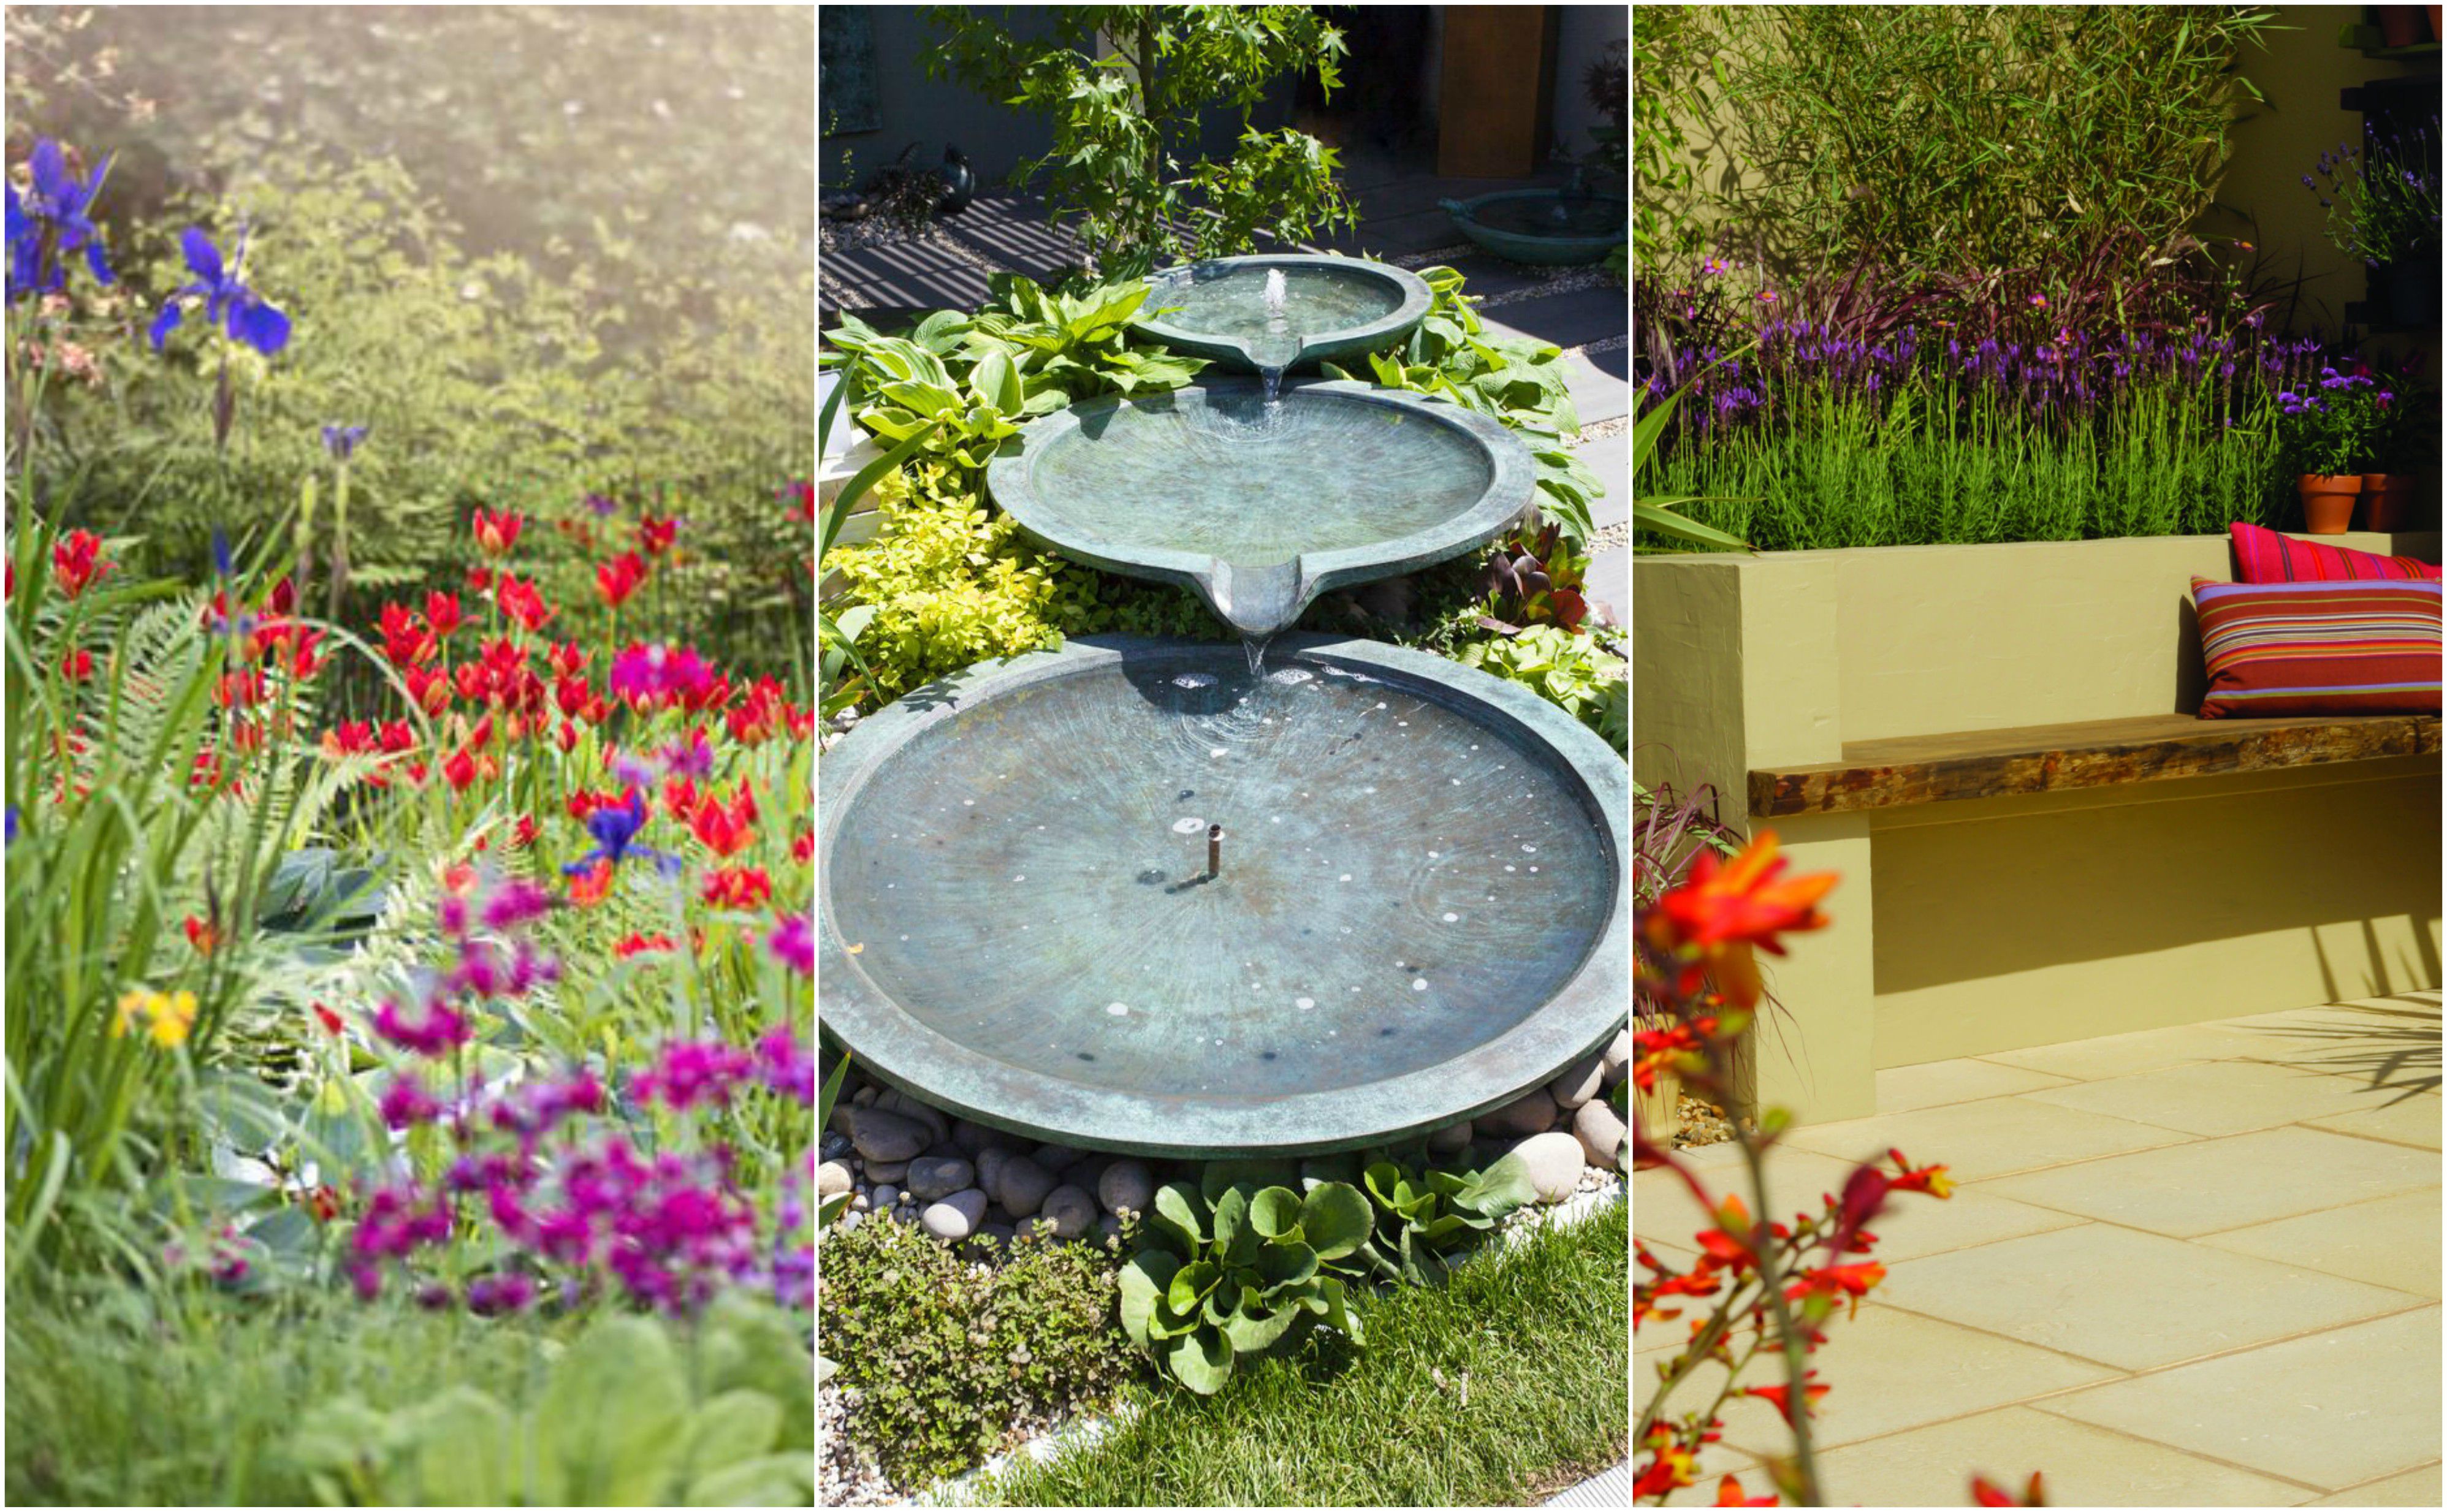 Top 10 garden design ideas to get the most out of your NFUOBCG outdoors